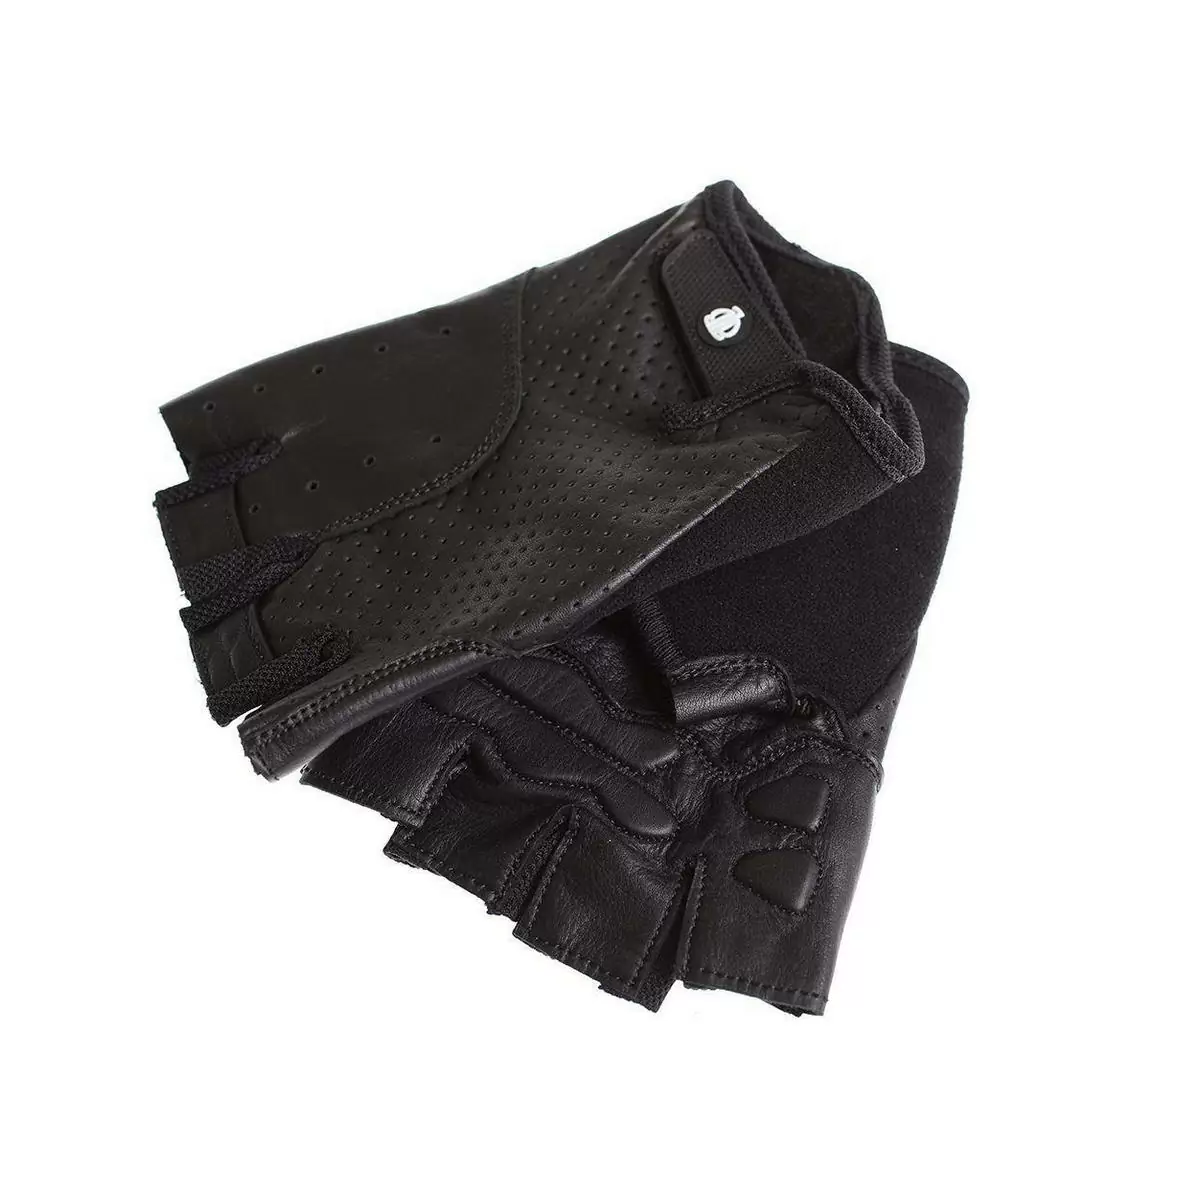 leather gloves classic sport size s black - image